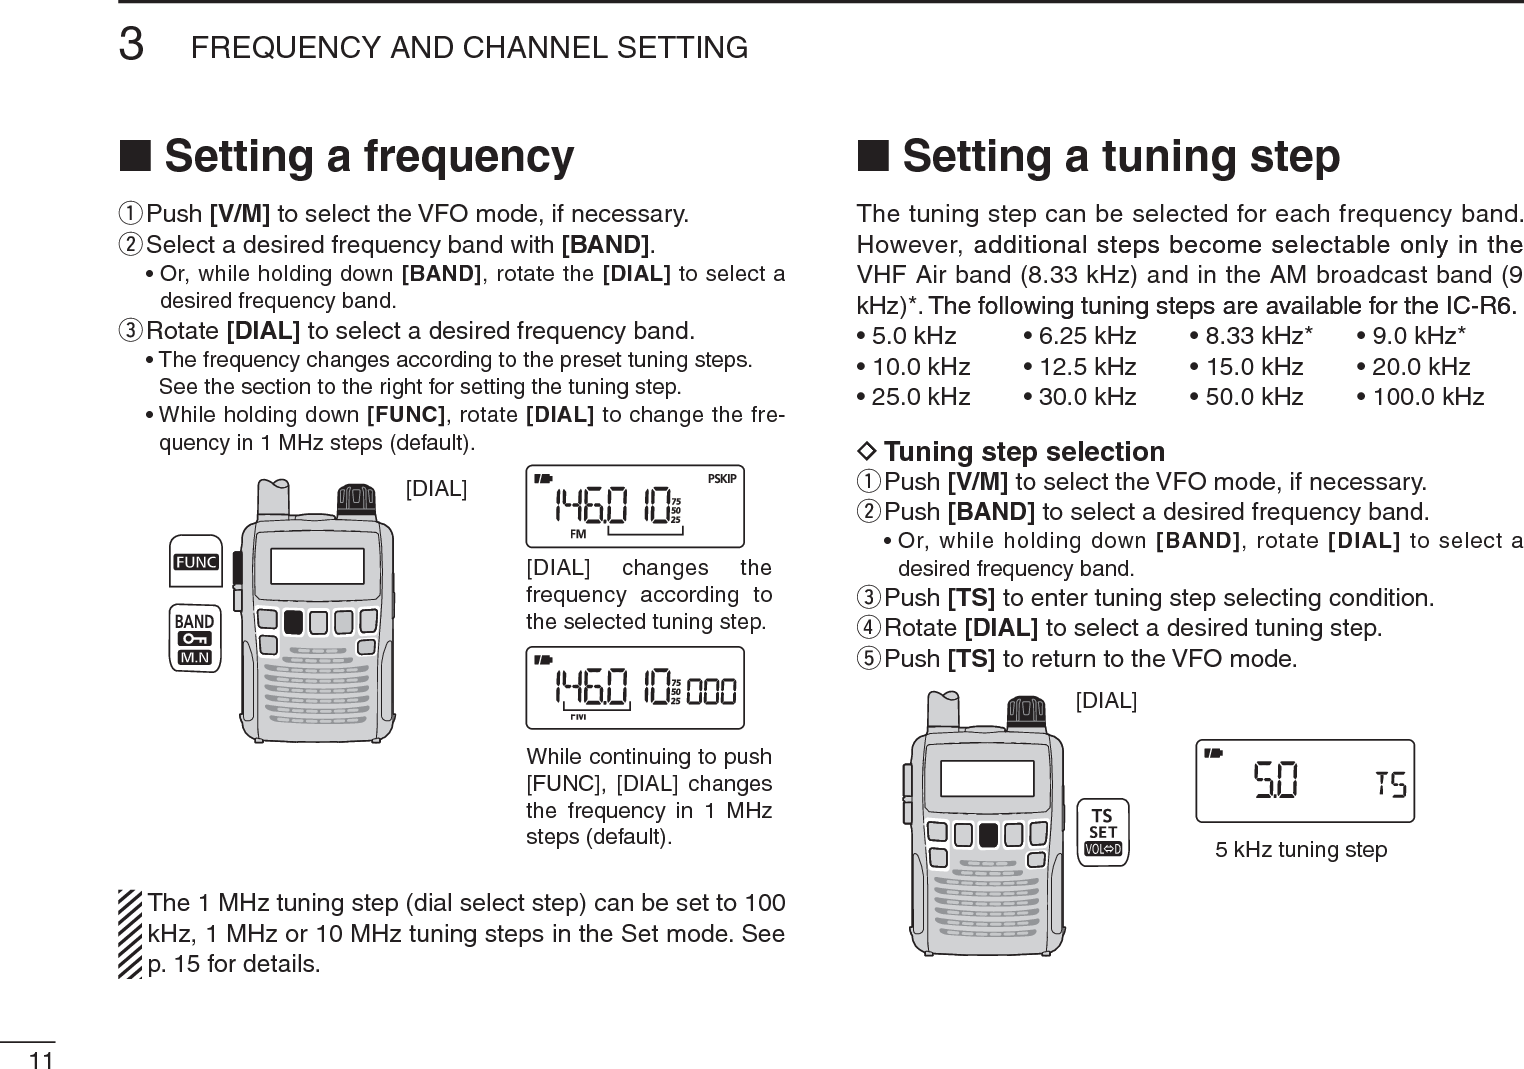 113FREQUENCY AND CHANNEL SETTING N Setting a frequencyqPush [V/M] to select the VFO mode, if necessary.wSelect a desired frequency band with [BAND].• Or, while holding down [BAND], rotate the [DIAL] to select a desired frequency band.eRotate [DIAL] to select a desired frequency band.• The frequency changes according to the preset tuning steps. See the section to the right for setting the tuning step.• While holding down [FUNC], rotate [DIAL] to change the fre-quency in 1 MHz steps (default).[DIAL][DIAL] changes thefrequency according tothe selected tuning step.While continuing to push[FUNC], [DIAL] changesthe frequency in 1 MHzsteps (default).The 1 MHz tuning step (dial select step) can be set to 100 kHz, 1 MHz or 10 MHz tuning steps in the Set mode. See p. 15 for details.NSetting a tuning stepThe tuning step can be selected for each frequency band. However, additional steps become selectable only in theadditional steps become selectable only in the VHF Air band (8.33 kHz) and in the AM broadcast band (9 kHz)*. The following tuning steps are available for the IC-R6.The following tuning steps are available for the IC-R6.• 5.0 kHz • 6.25 kHz • 8.33 kHz* • 9.0 kHz*• 10.0 kHz • 12.5 kHz • 15.0 kHz • 20.0 kHz• 25.0 kHz • 30.0 kHz • 50.0 kHz • 100.0 kHzD Tuning step selectionqPush [V/M] to select the VFO mode, if necessary.wPush [BAND] to select a desired frequency band.• Or, while holding down [BAND], rotate [DIAL] to select a desired frequency band.ePush [TS] to enter tuning step selecting condition.rRotate [DIAL] to select a desired tuning step.tPush [TS] to return to the VFO mode.[DIAL]5 kHz tuning step